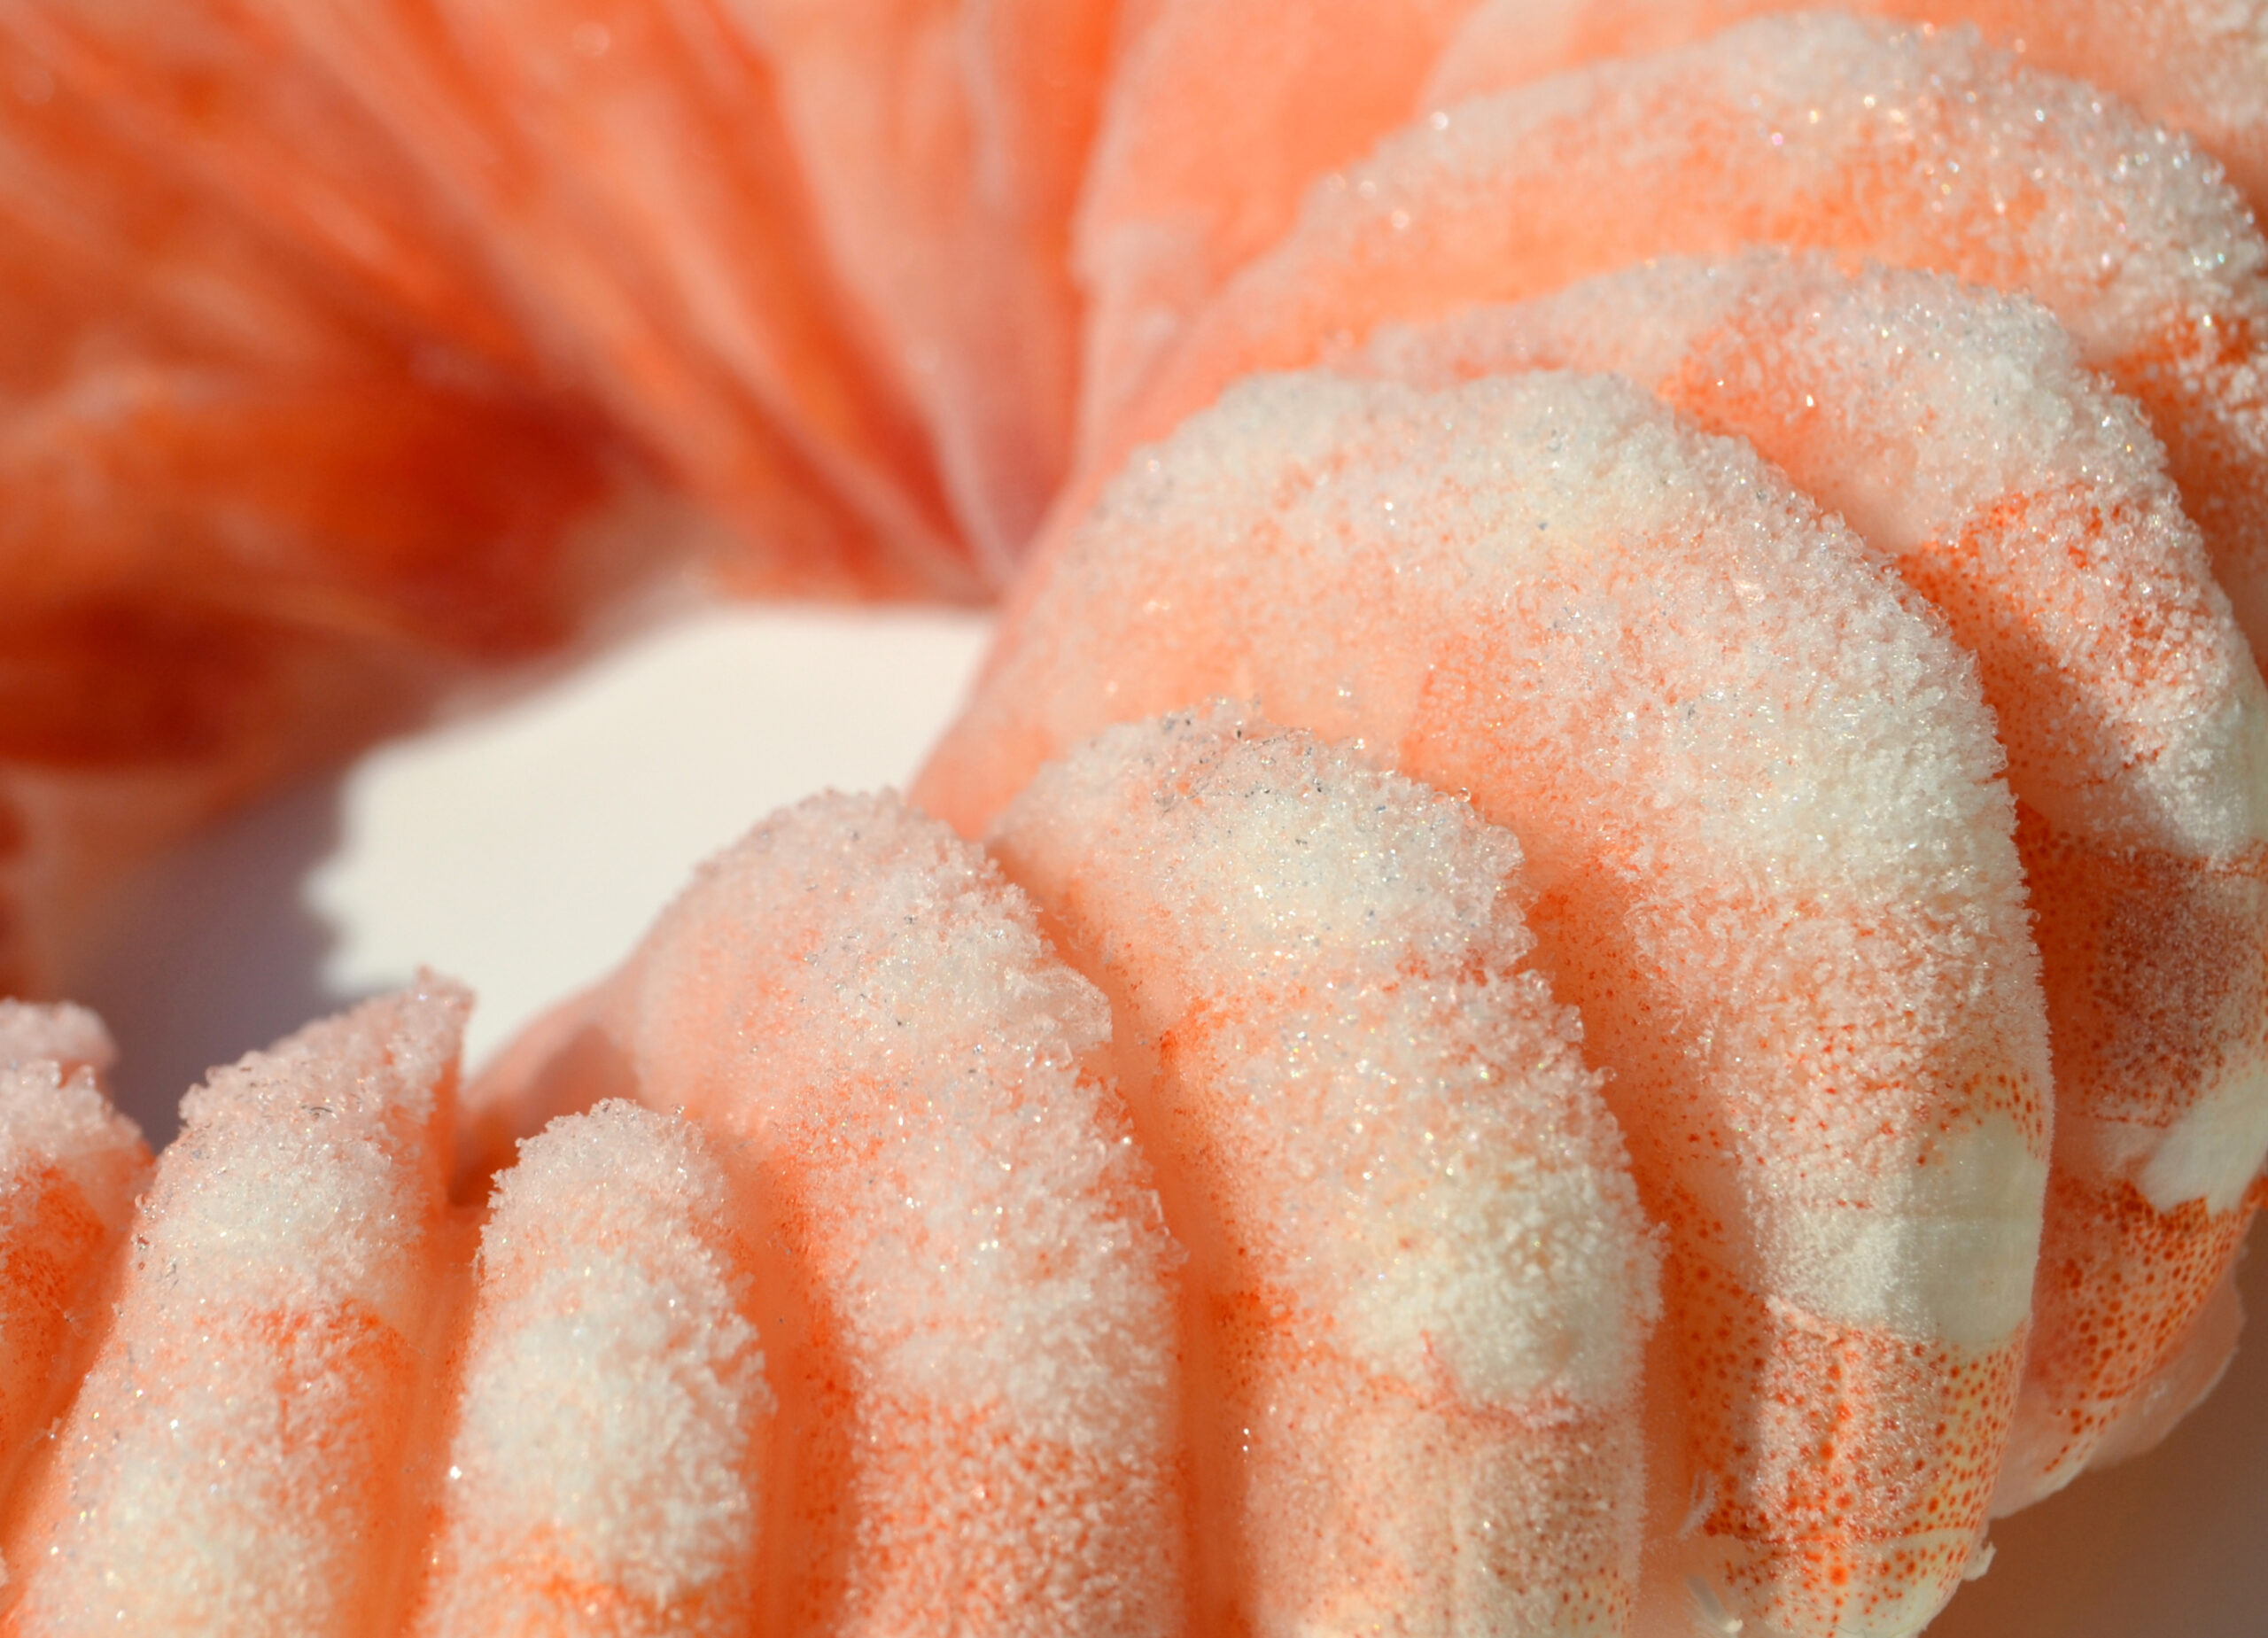 A seafood production company issued a voluntary recall for various packaged frozen shrimp products due to potential contamination with the food-borne illness salmonella.